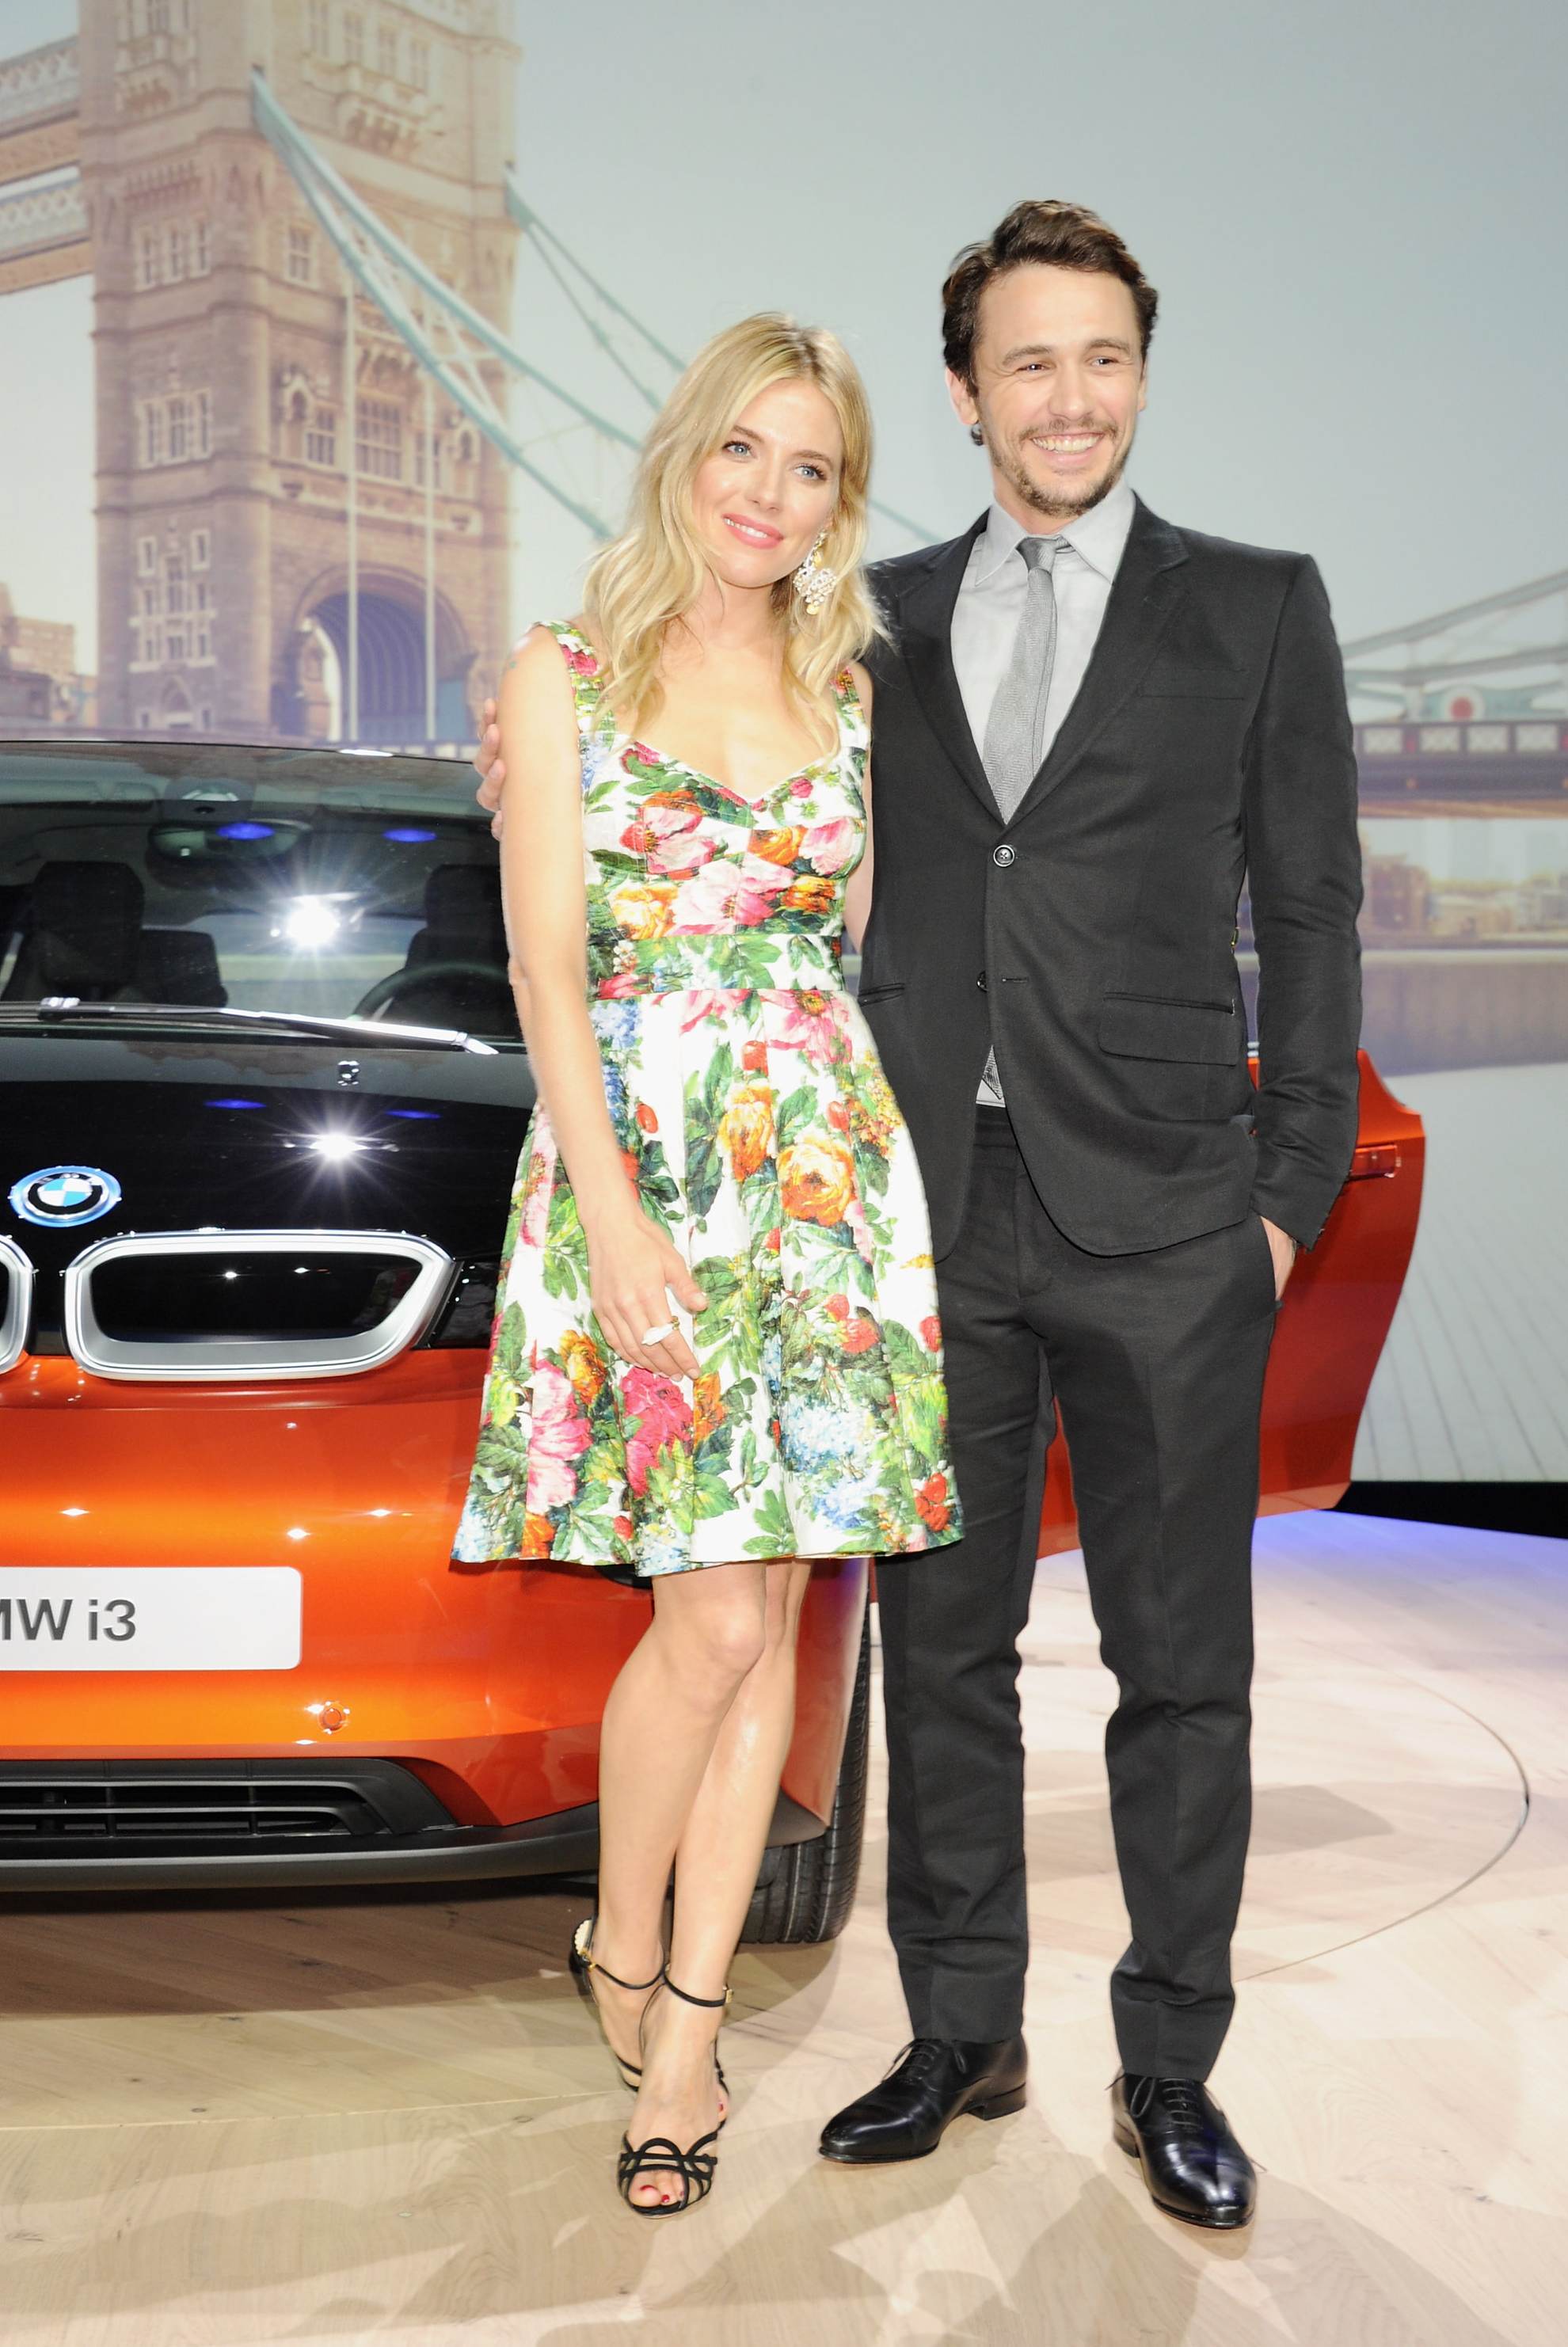 Sienna Miller and James Franco celebrate the world premiere of the BMW i3